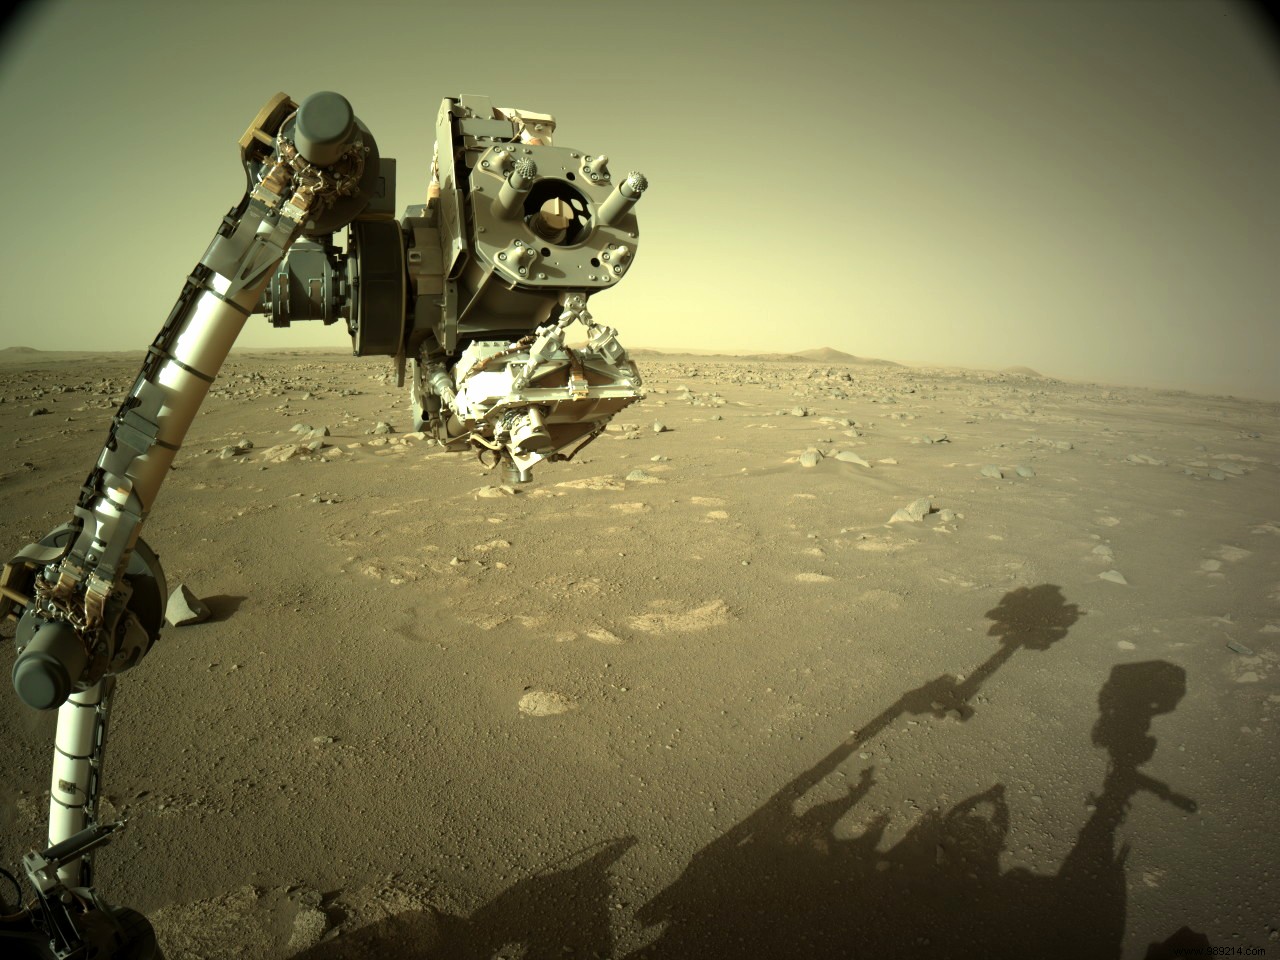 Why is the Perseverance rover unable to find life on Mars on its own? 